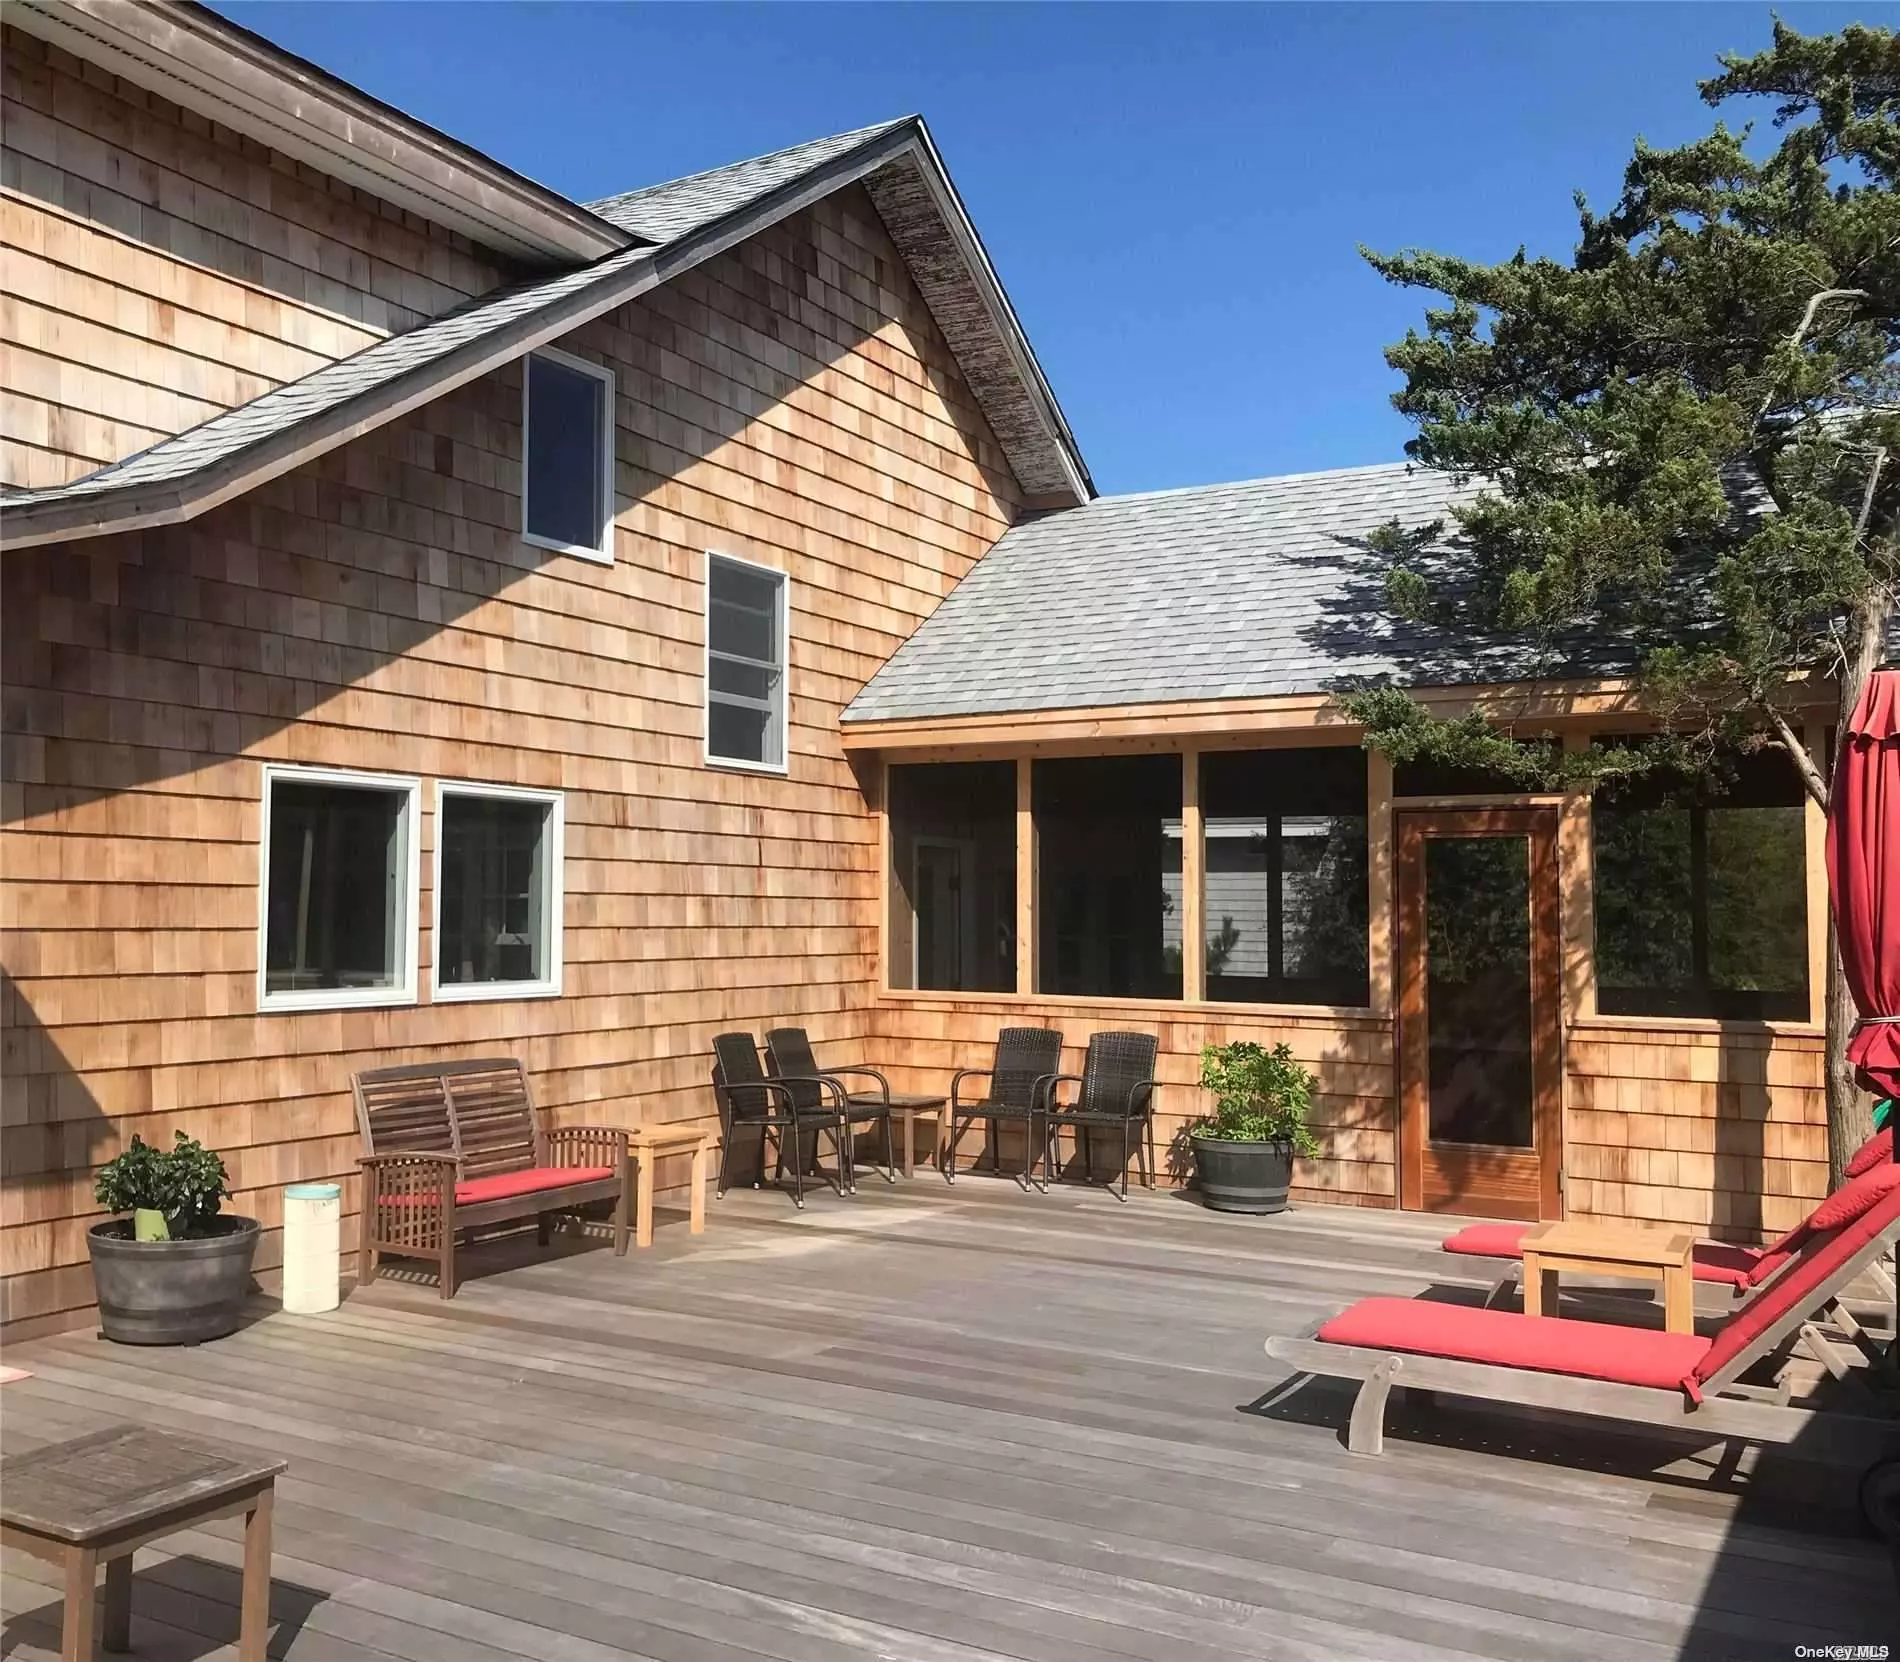 Newly Raised & Beautifully Renovated. Very Spacious, Fabulous Screened In Porch & Living Area. Private Deck With Hot Tub. Home Includes 5 Bikes, 8 Beach Chairs, 2 Beach Umbrellas, And A Wagon.